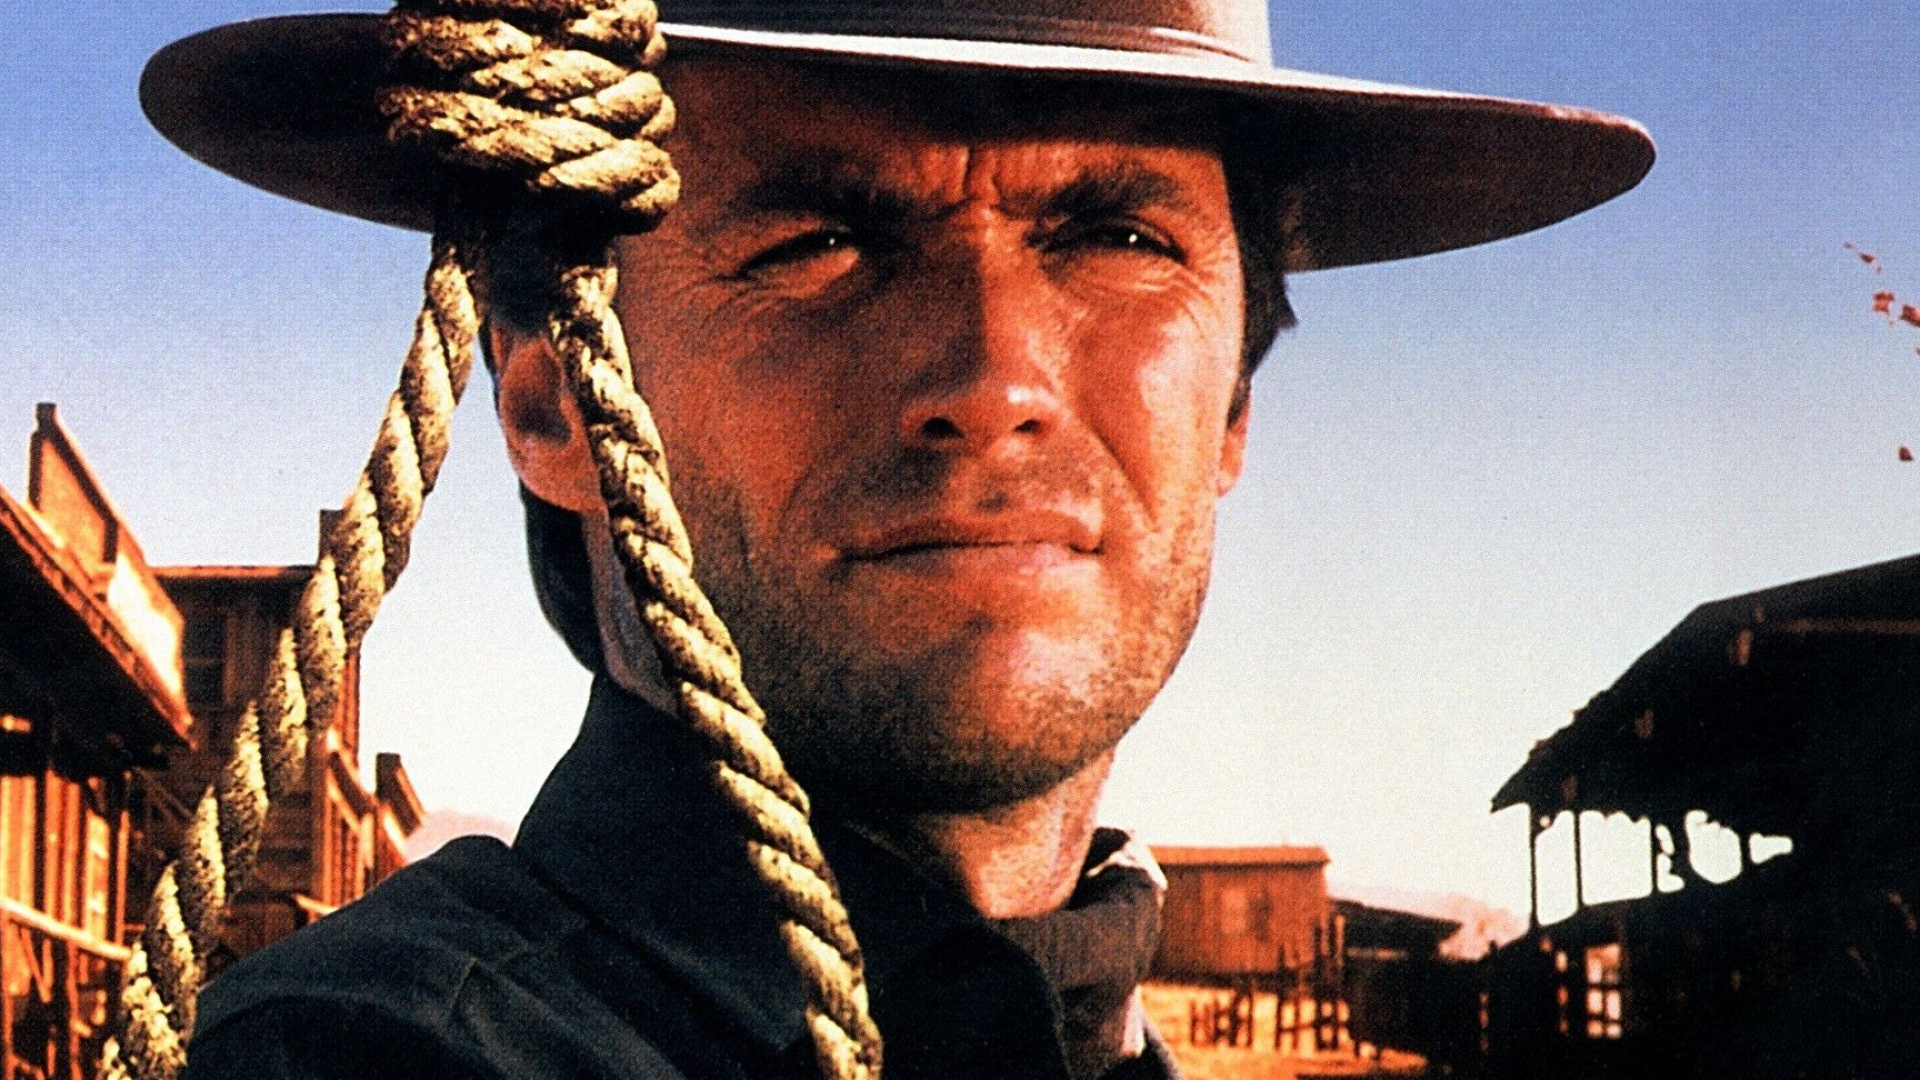 Clint Eastwood: Hang 'Em High, American DeLuxe Color Revisionist Western Film, Directed By Ted Post, Written By Leonard Freeman And Mel Goldberg, 1968. 1920x1080 Full HD Wallpaper.